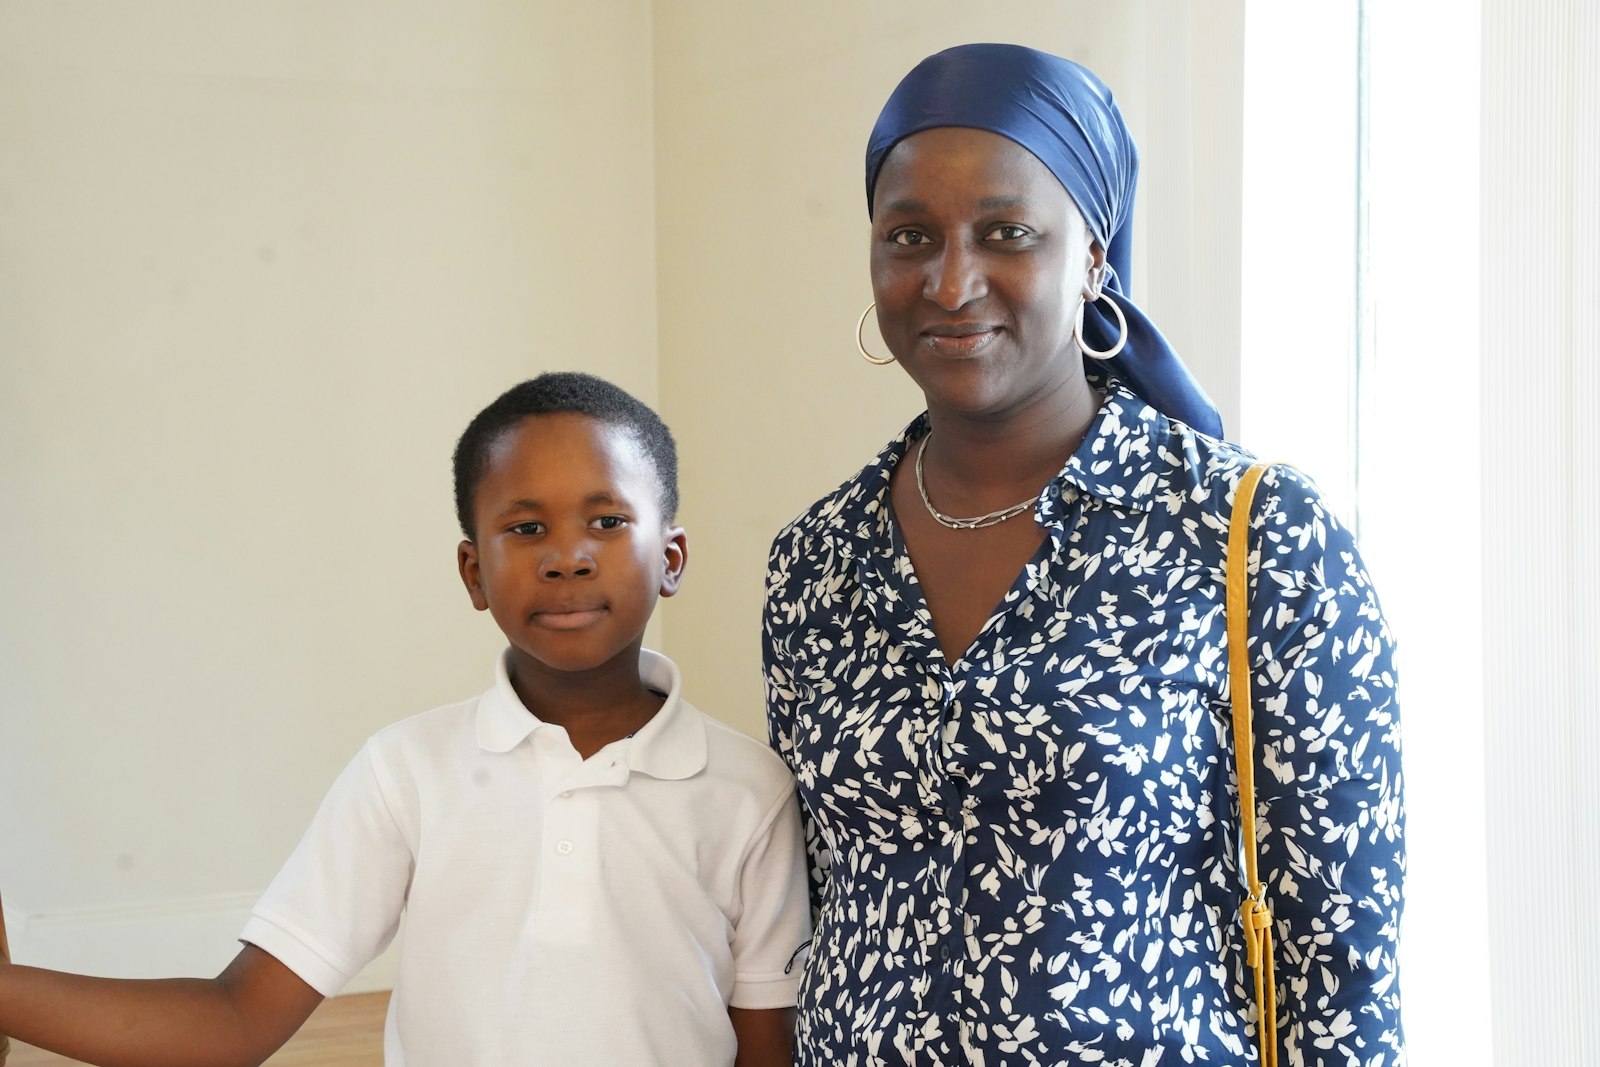 Coura Ndiaye from Senegal and her 7-year old son, Magib Diaw, are one of two families currently living at Bakhita House, a temporary home for immigrants, refugees and asylum-seekers at Christ the King Parish in Detroit.